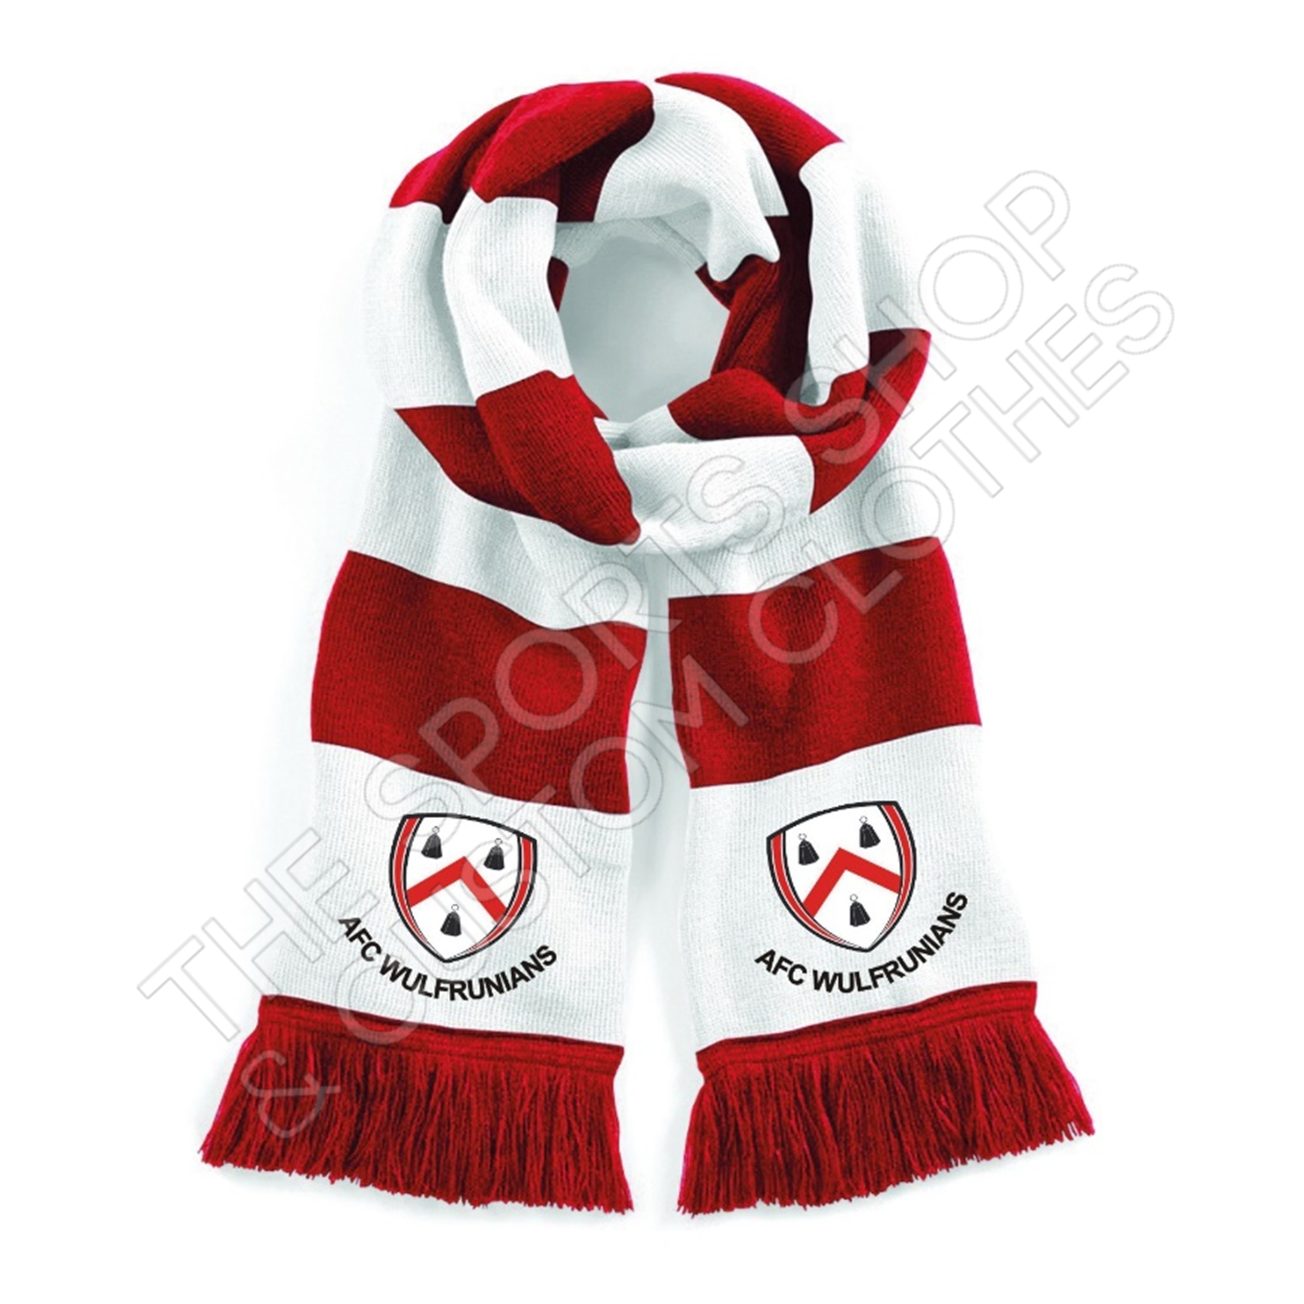 AFC Wulfrunians - Red/White Supporters Scarf